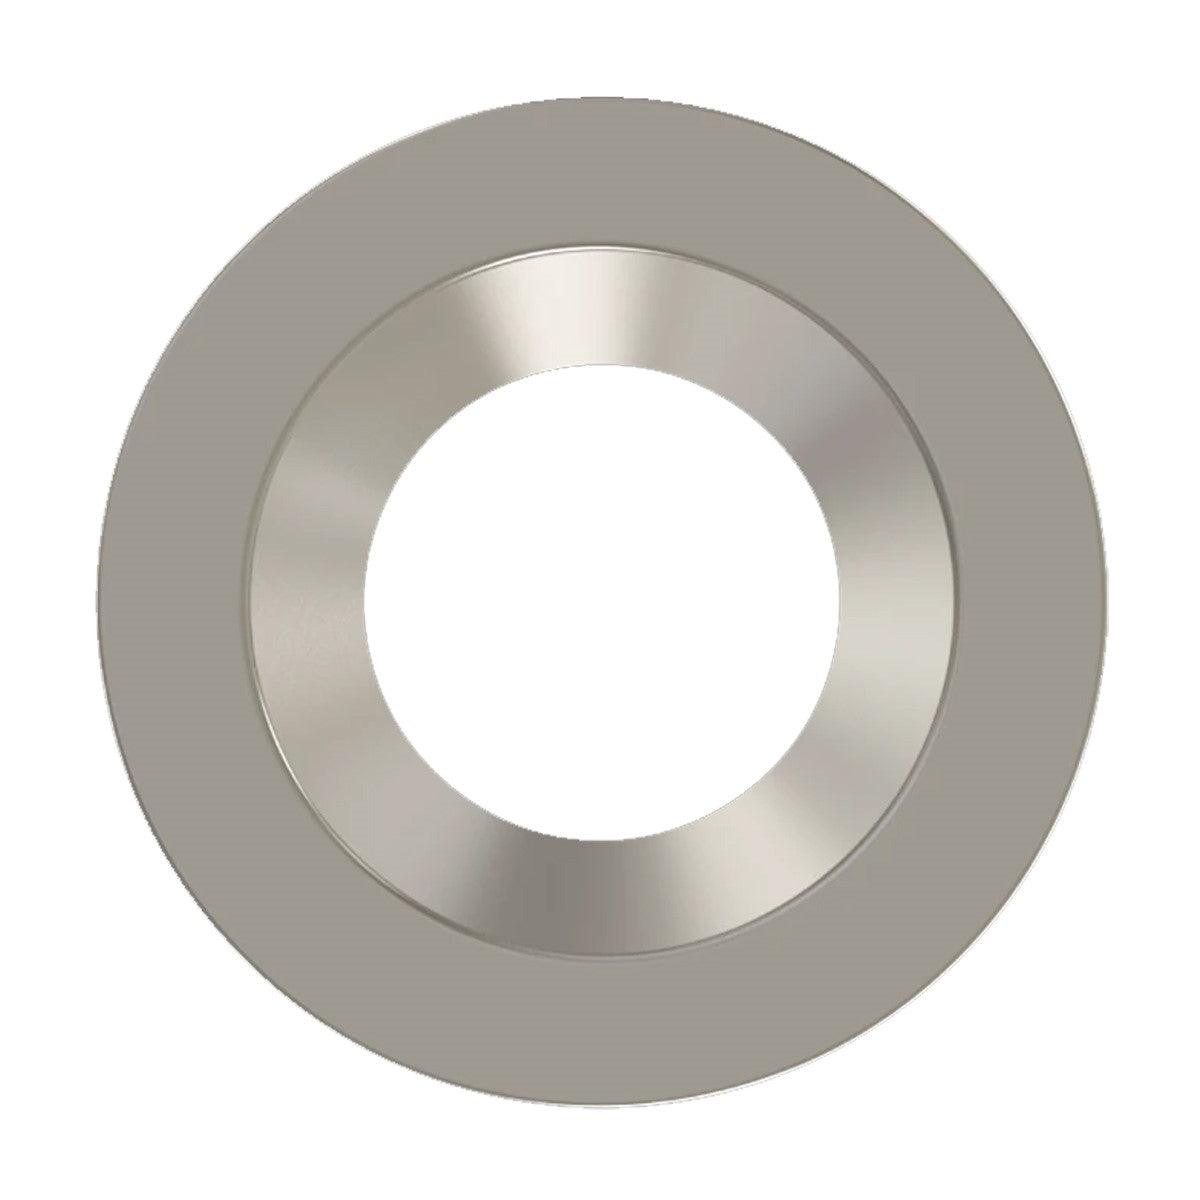 RAB 4 Inch Round Brushed Nickel / Smooth Trim for HA4 Series - Bees Lighting